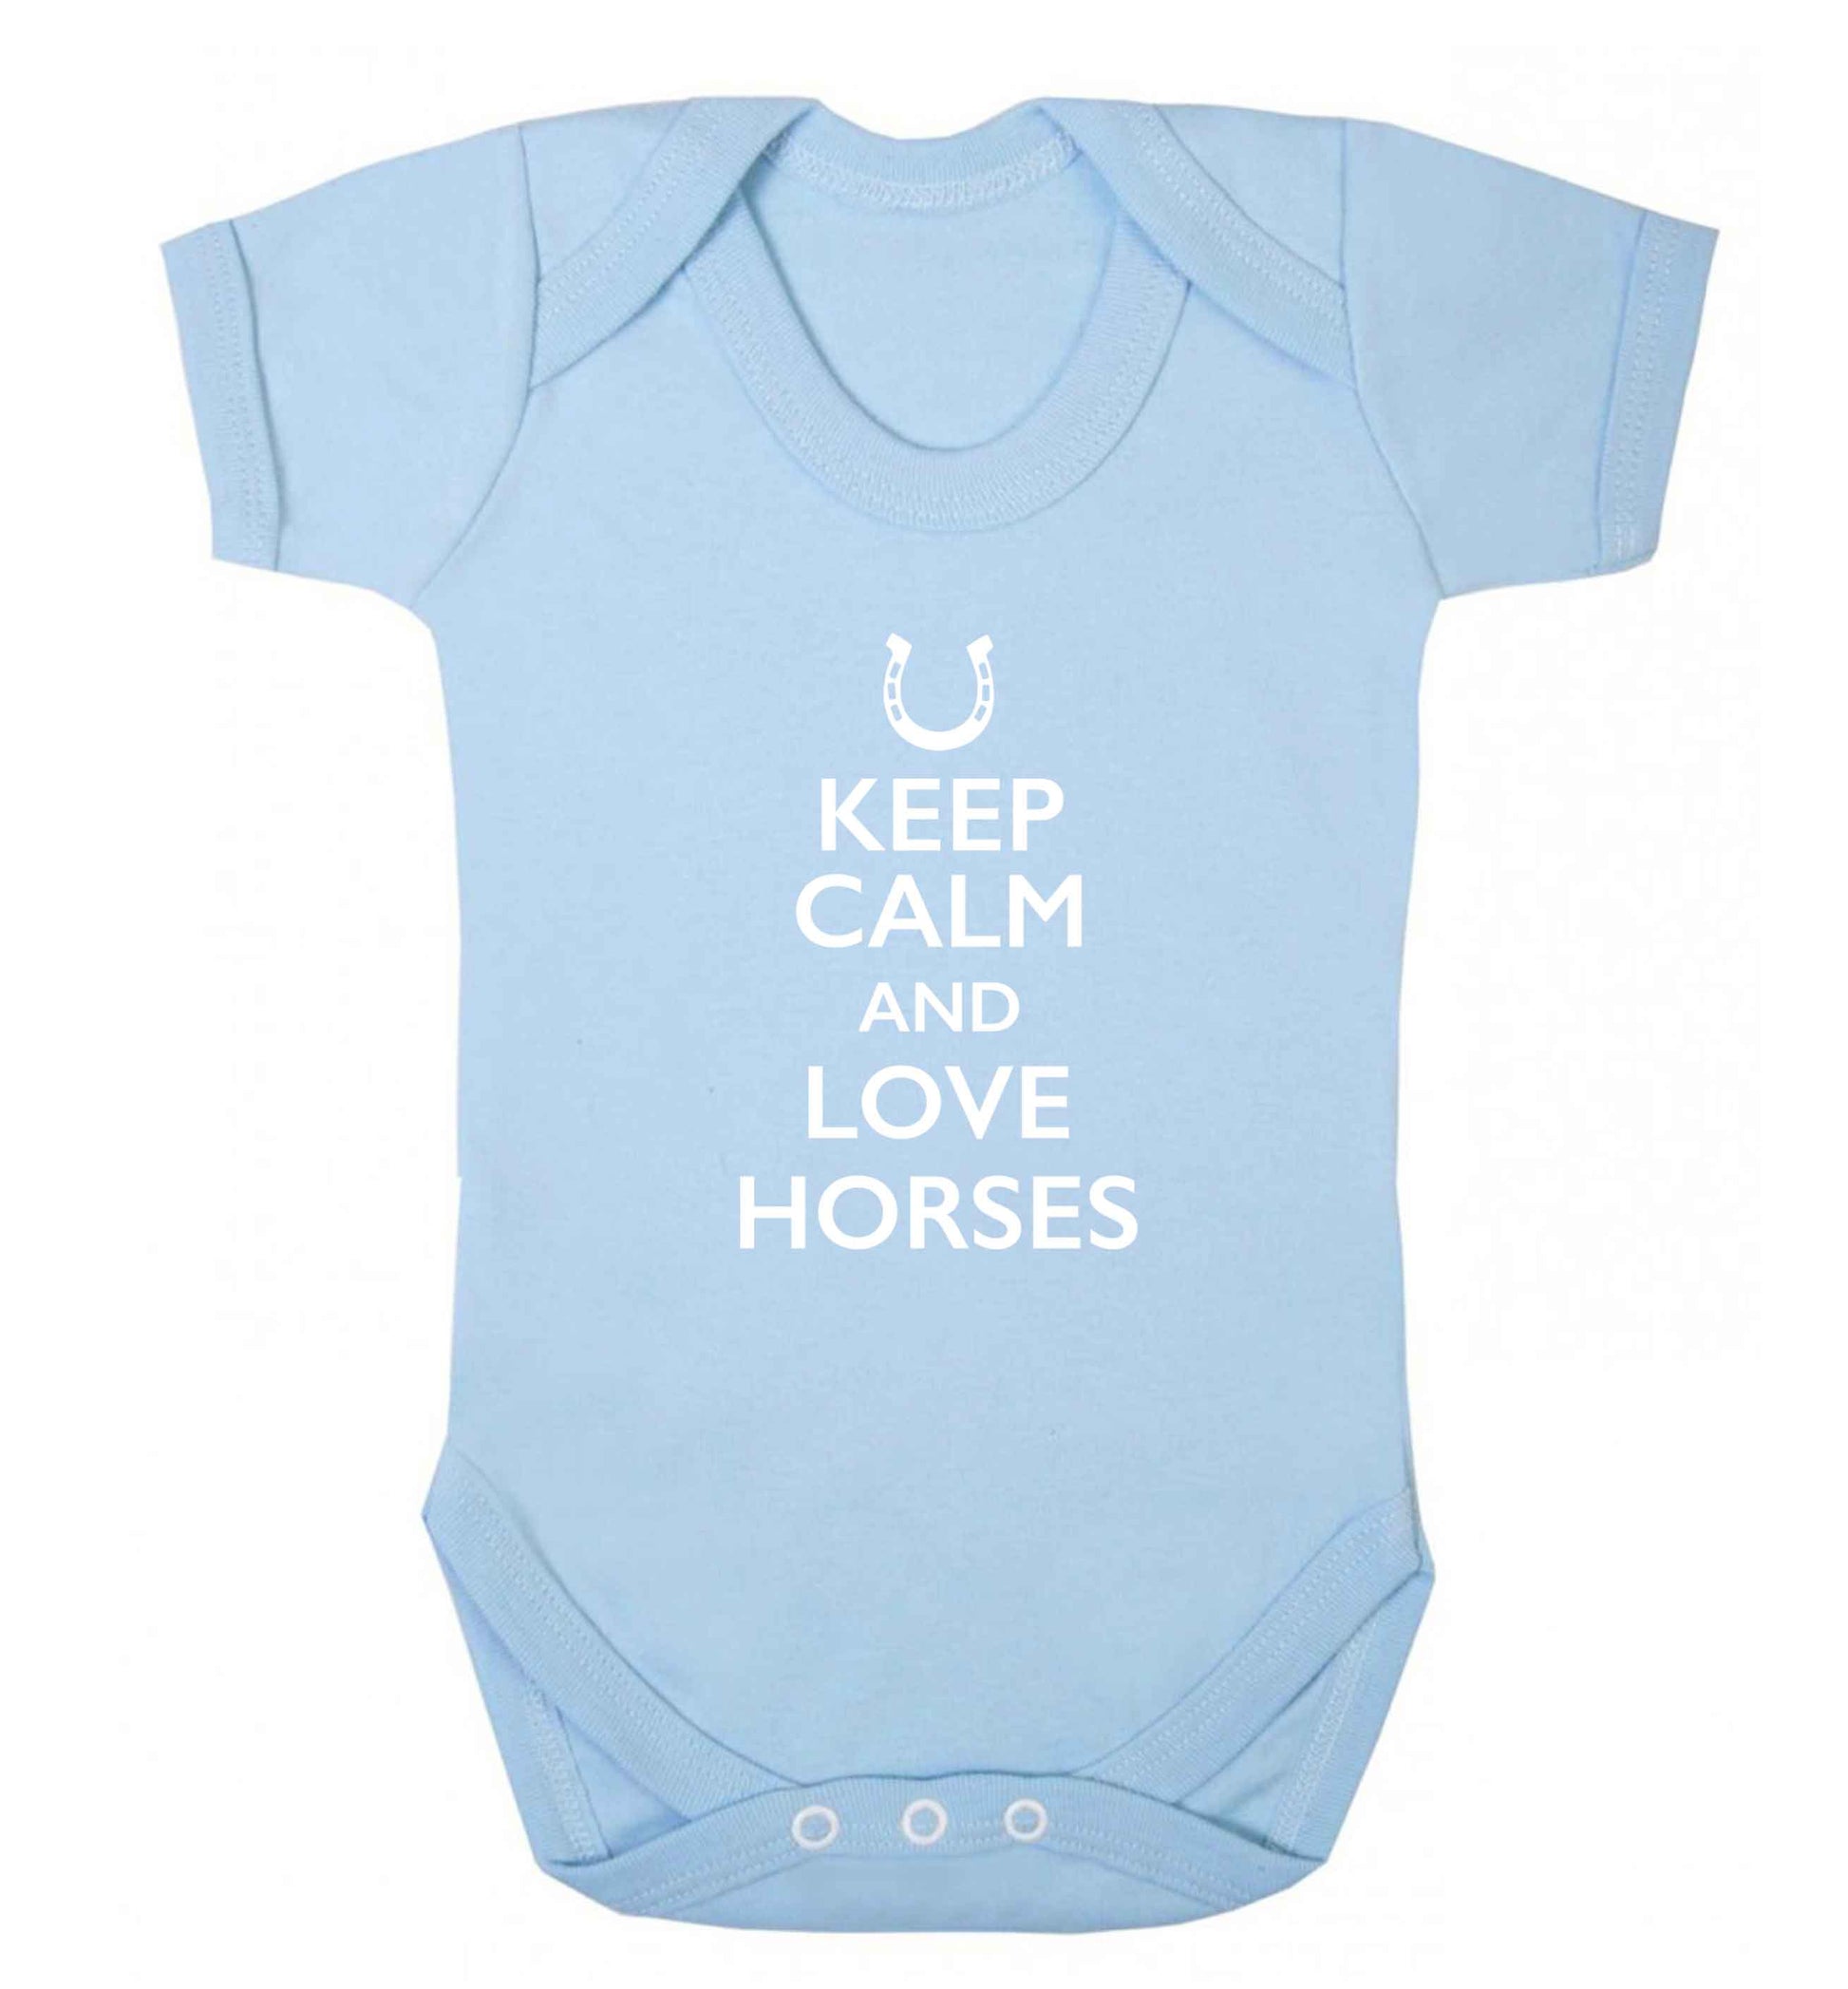 Keep calm and love horses baby vest pale blue 18-24 months